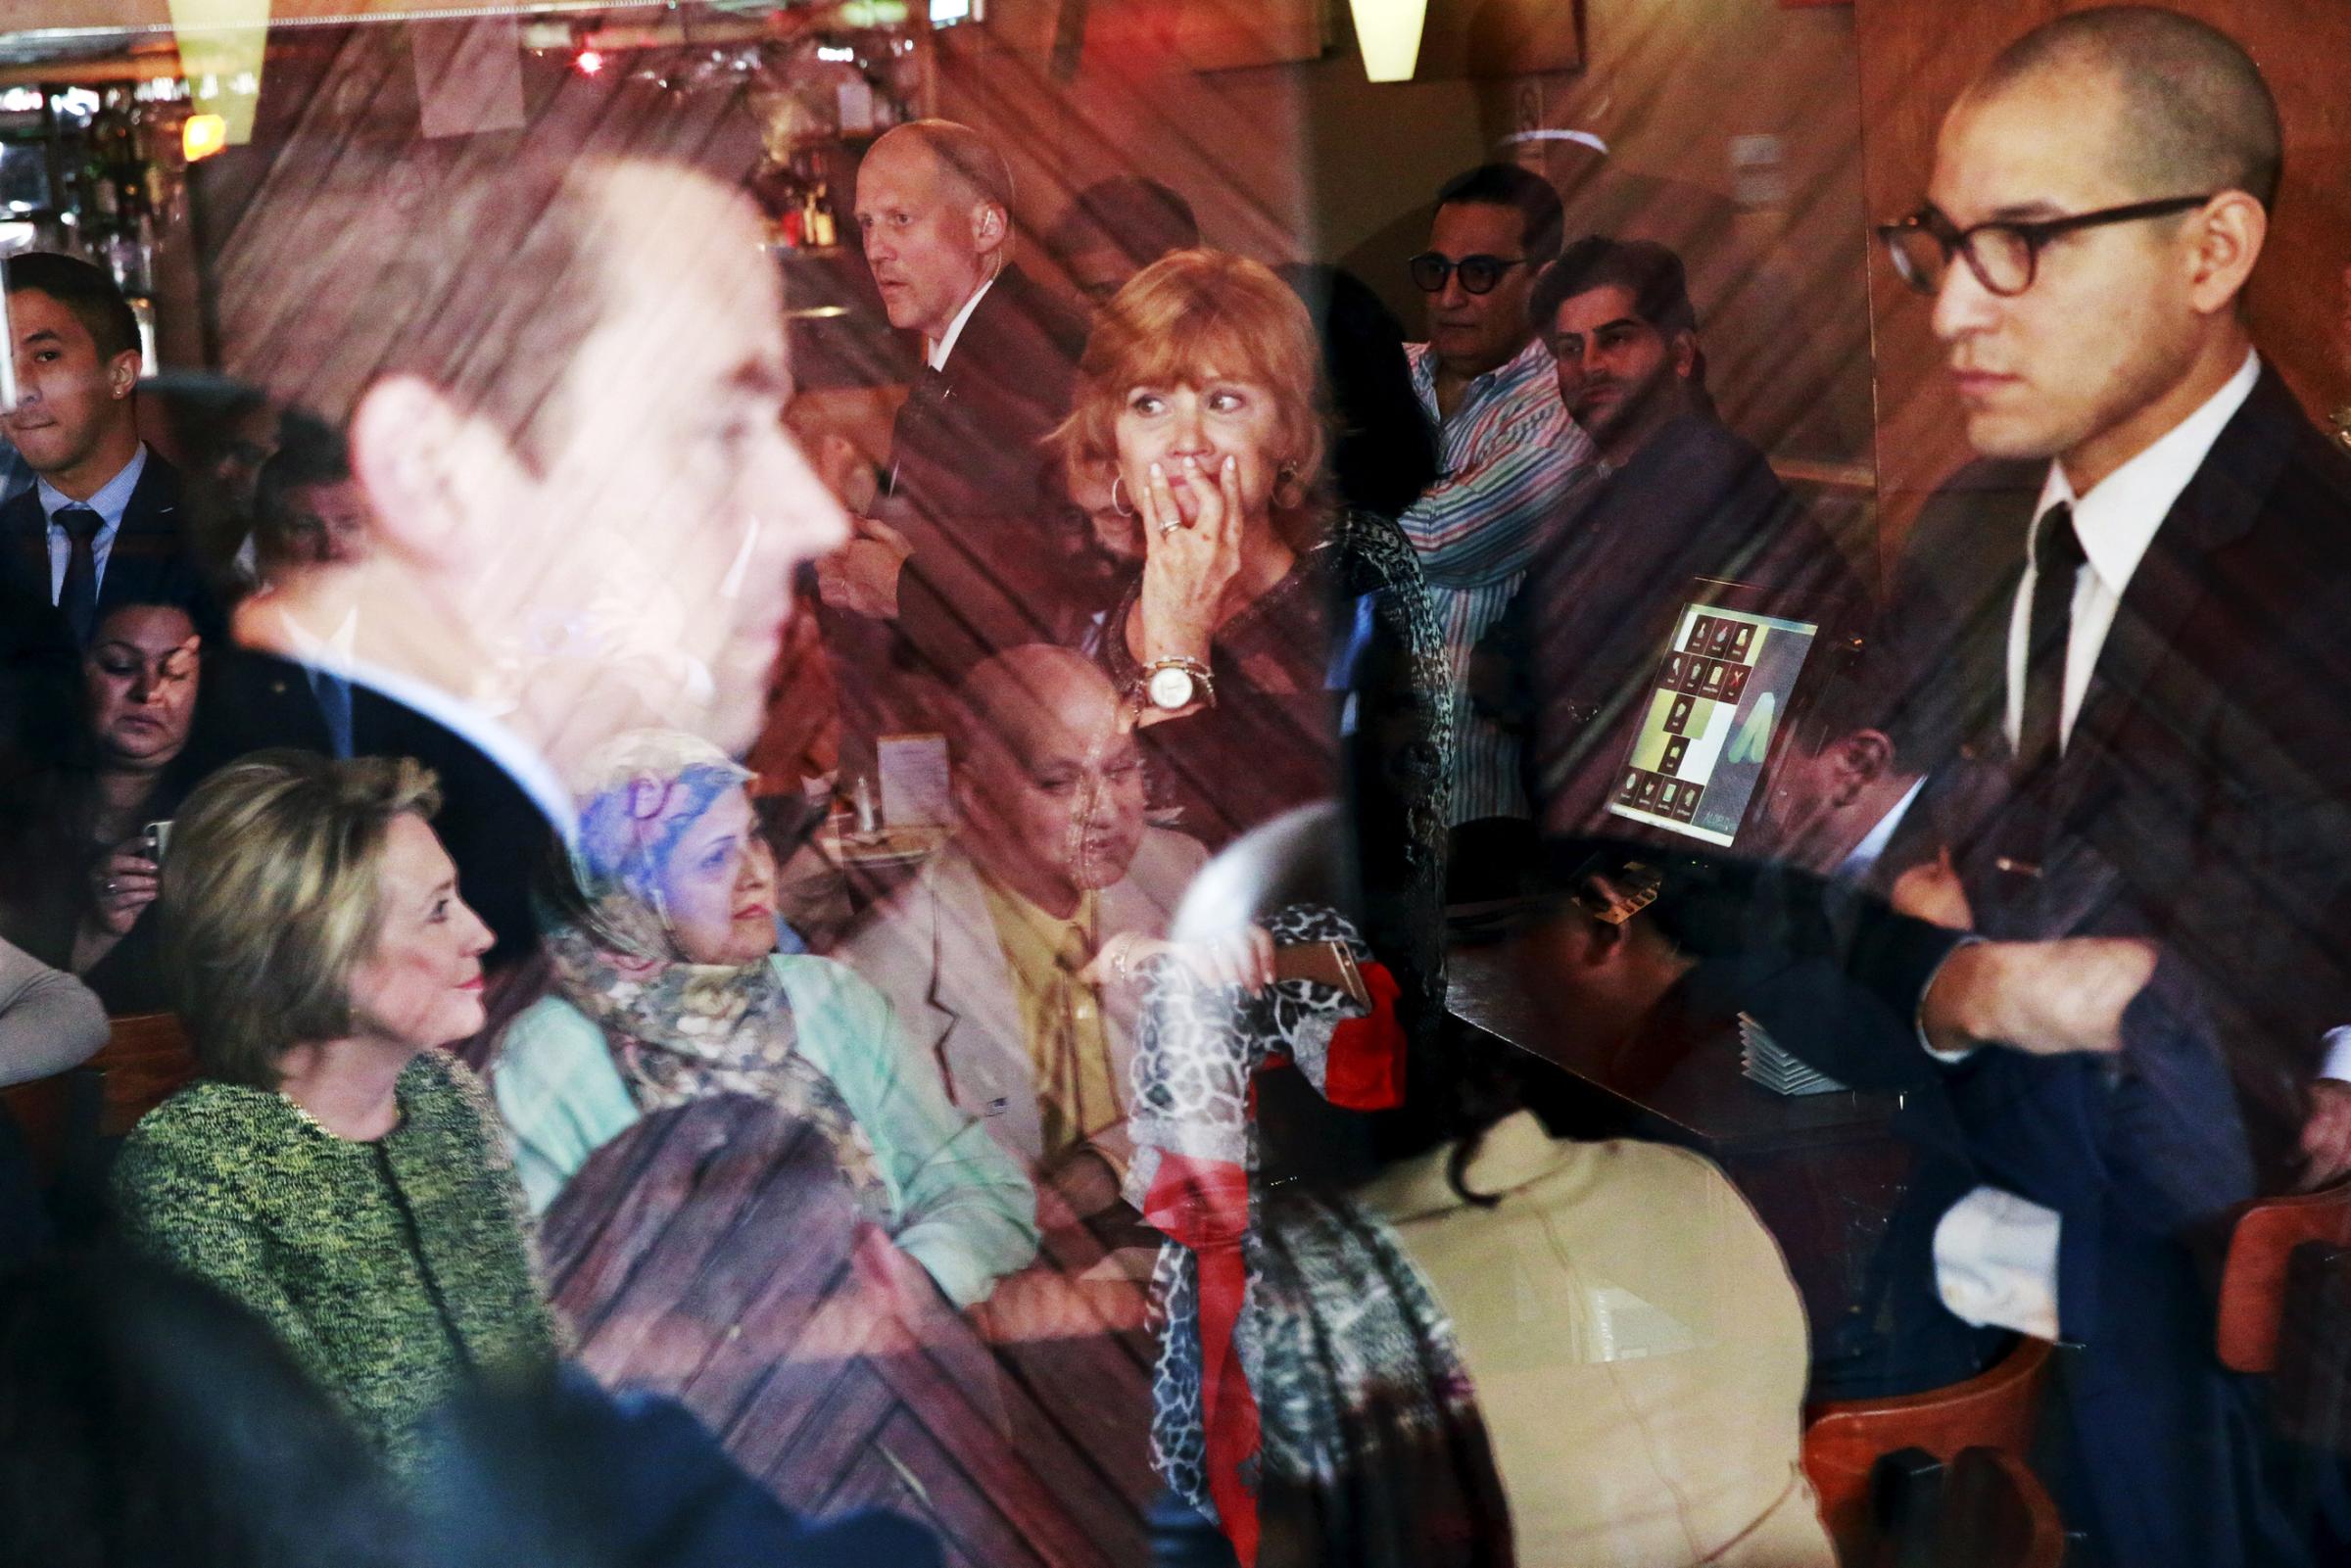 Patrons, security personnel, and members of the community gather to listen to Democratic presidential candidate Hillary Clinton during a visit to the Jackson Diner in New York's Queens borough on April 11, 2016.